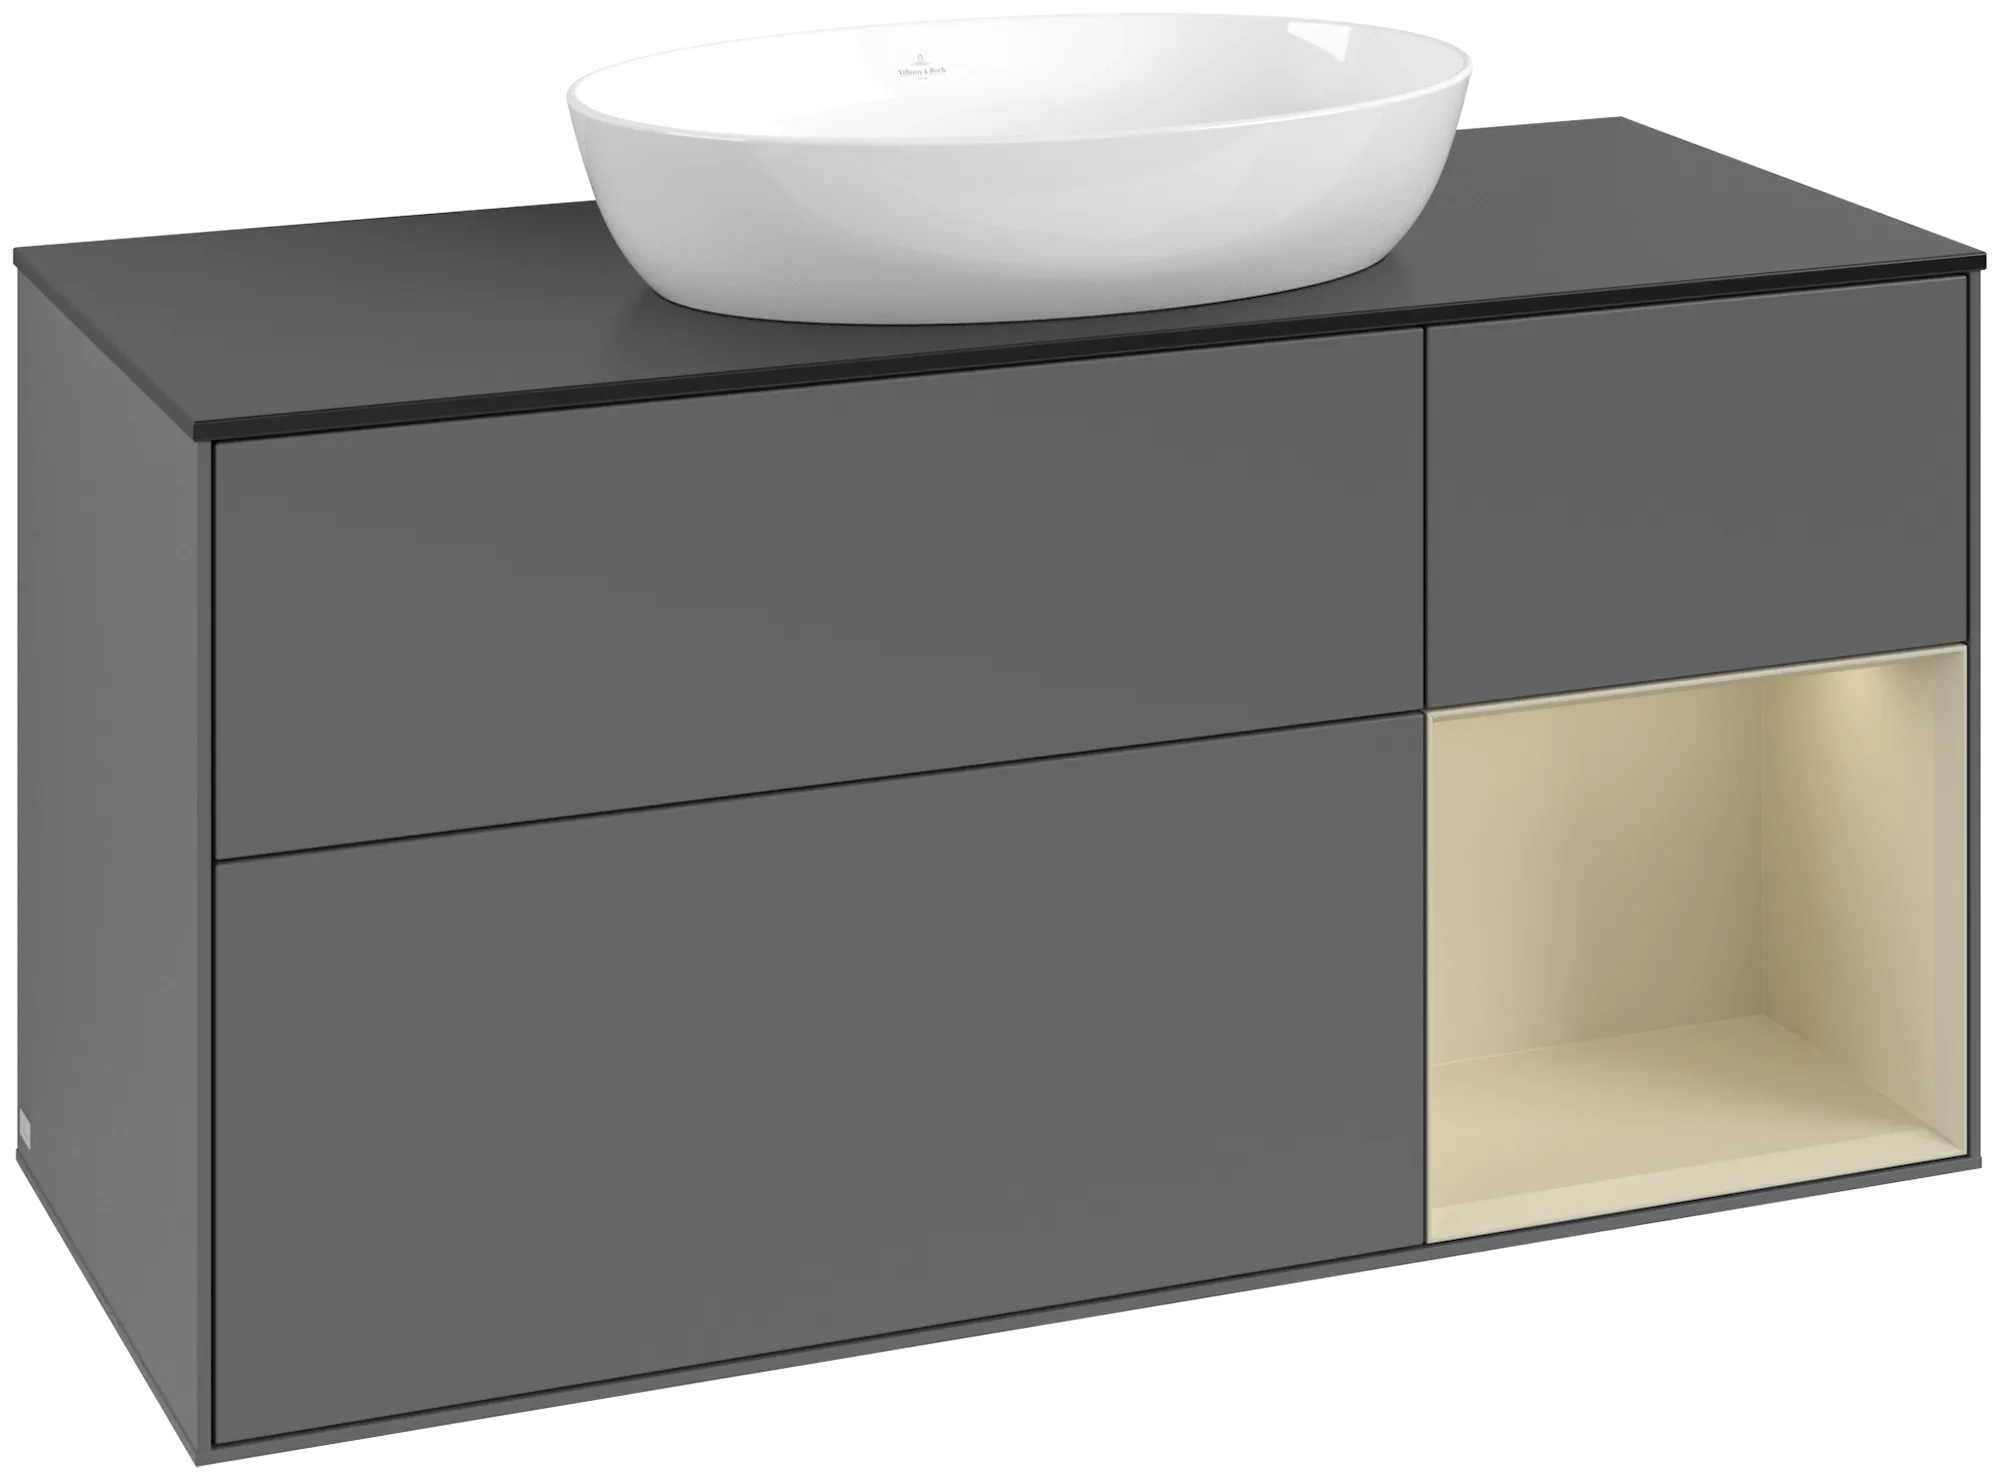 Picture of VILLEROY BOCH Finion Vanity unit, with lighting, 3 pull-out compartments, 1200 x 603 x 501 mm, Anthracite Matt Lacquer / Silk Grey Matt Lacquer / Glass Black Matt #FA72HJGK